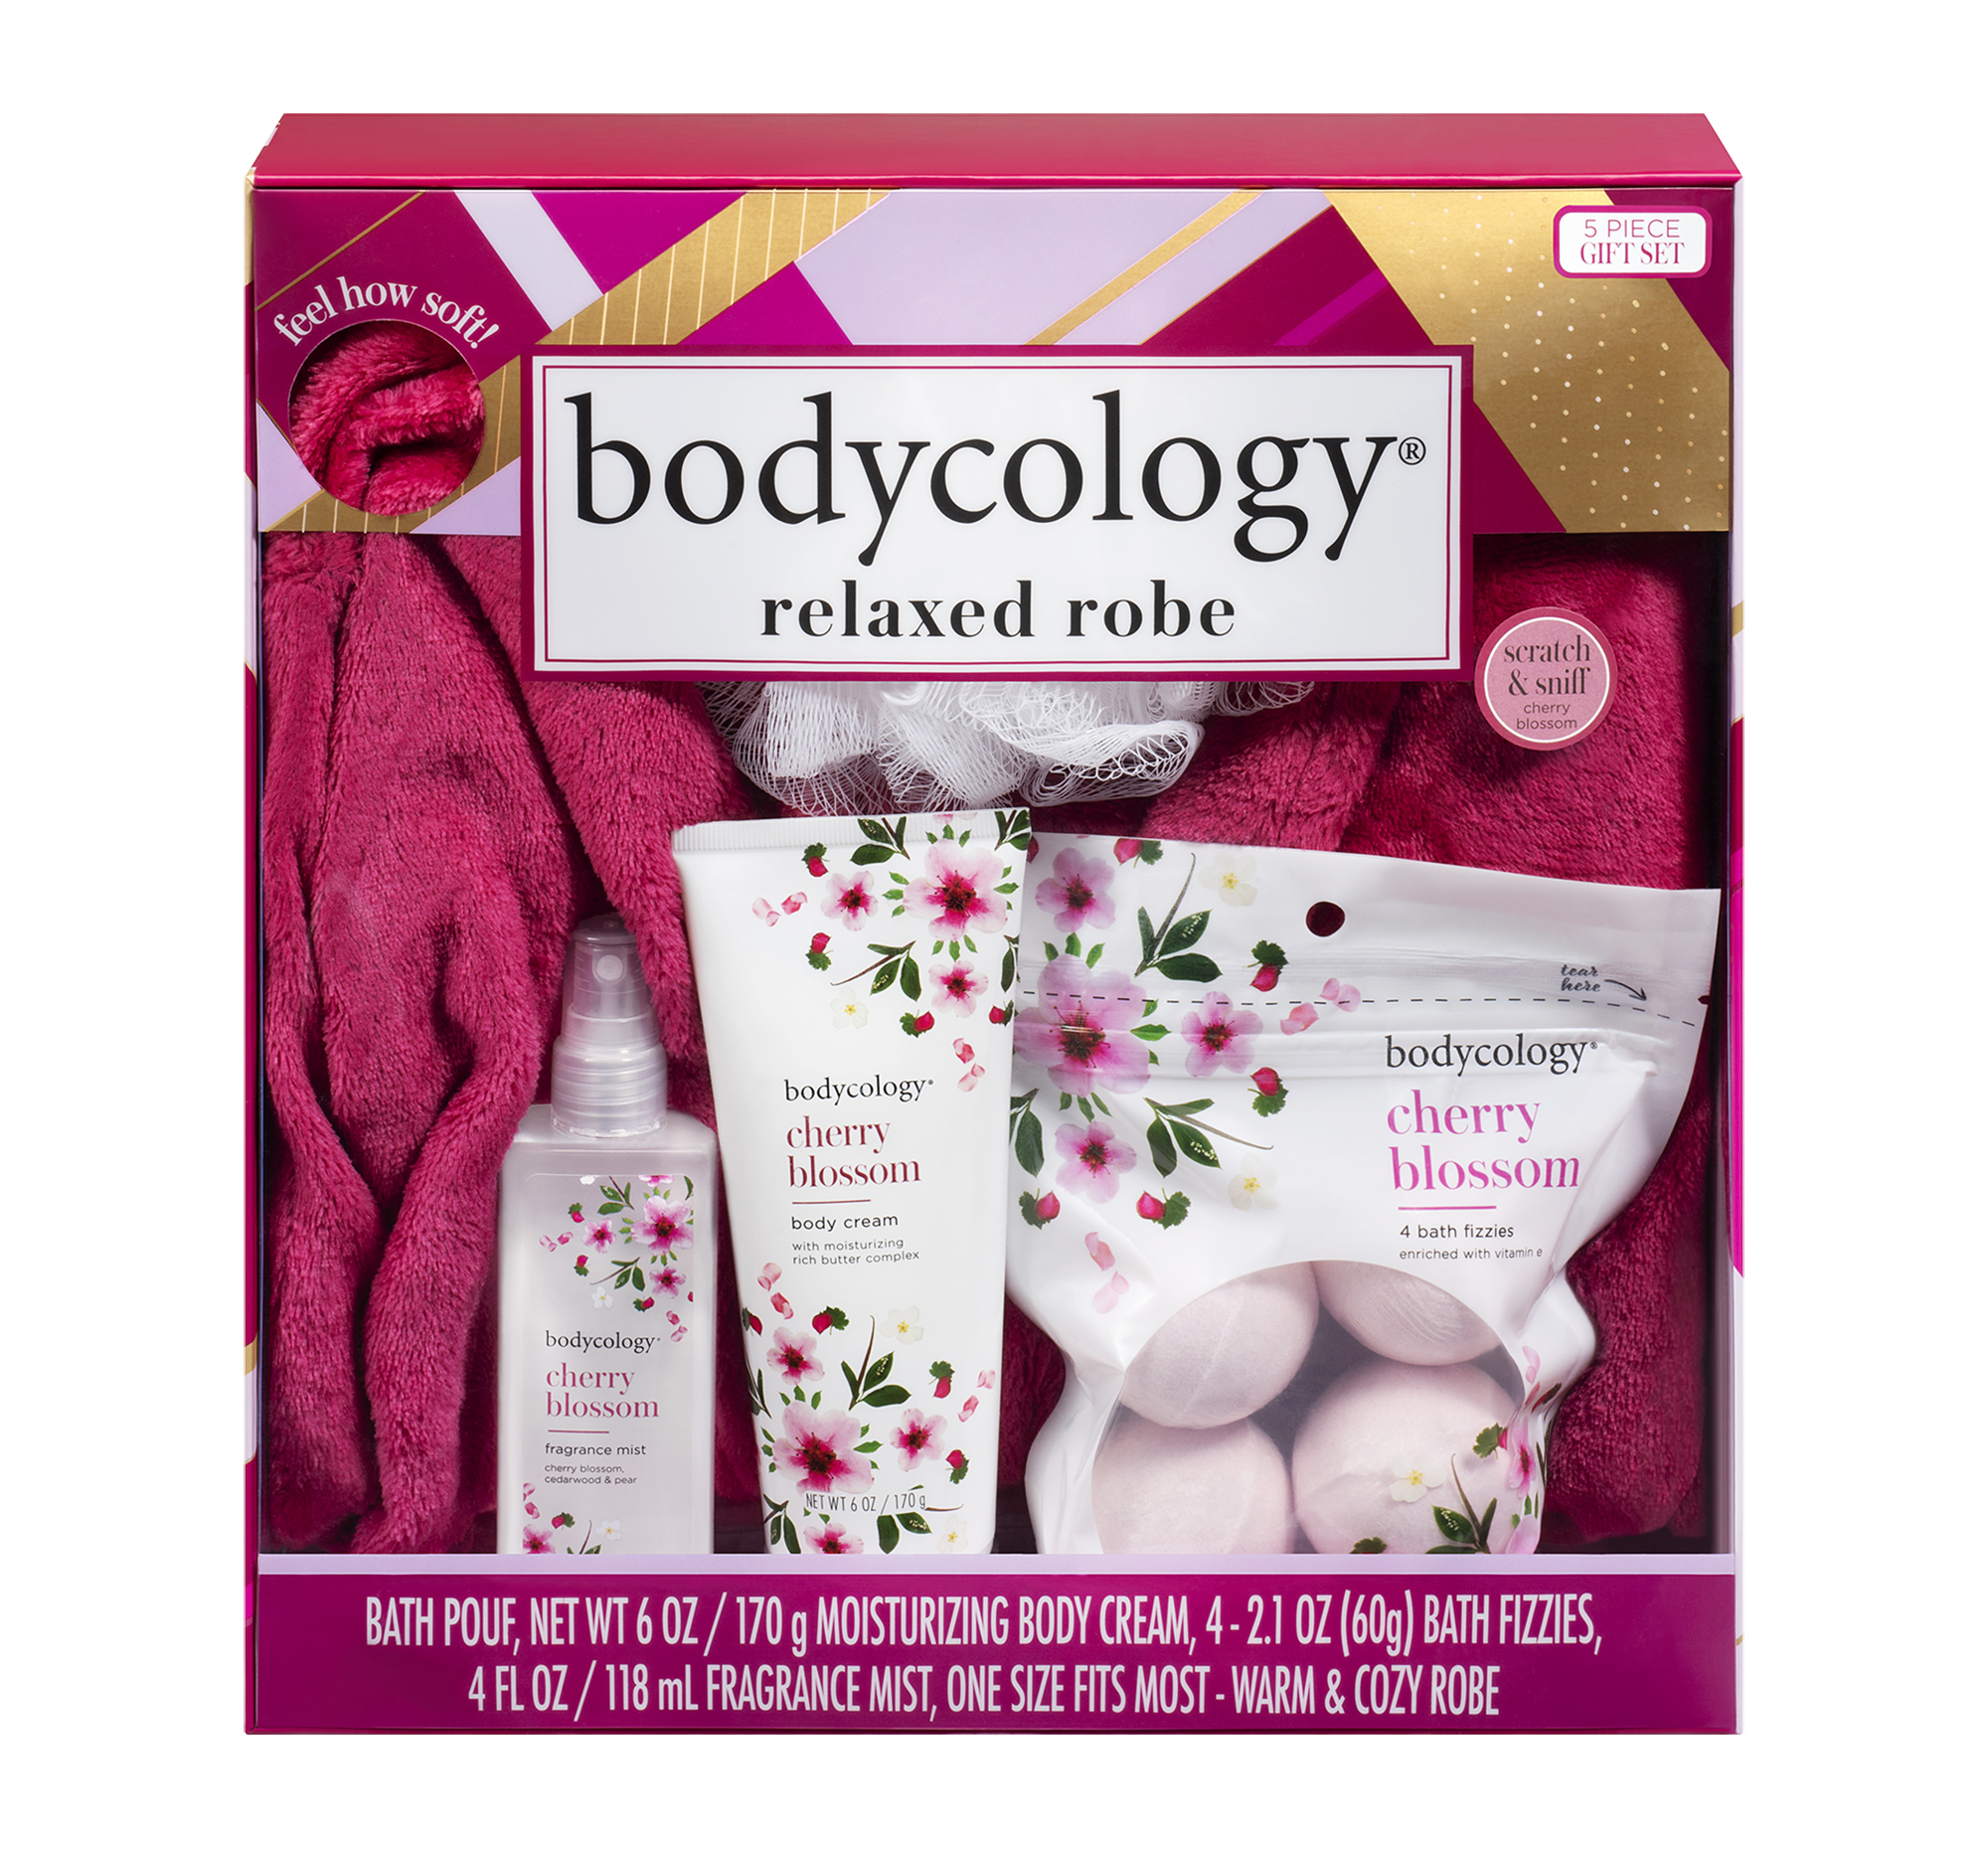 Bodycology Cherry Blossom Relaxed Robe Bath & Body Gift Set, 5 PC - image 1 of 6